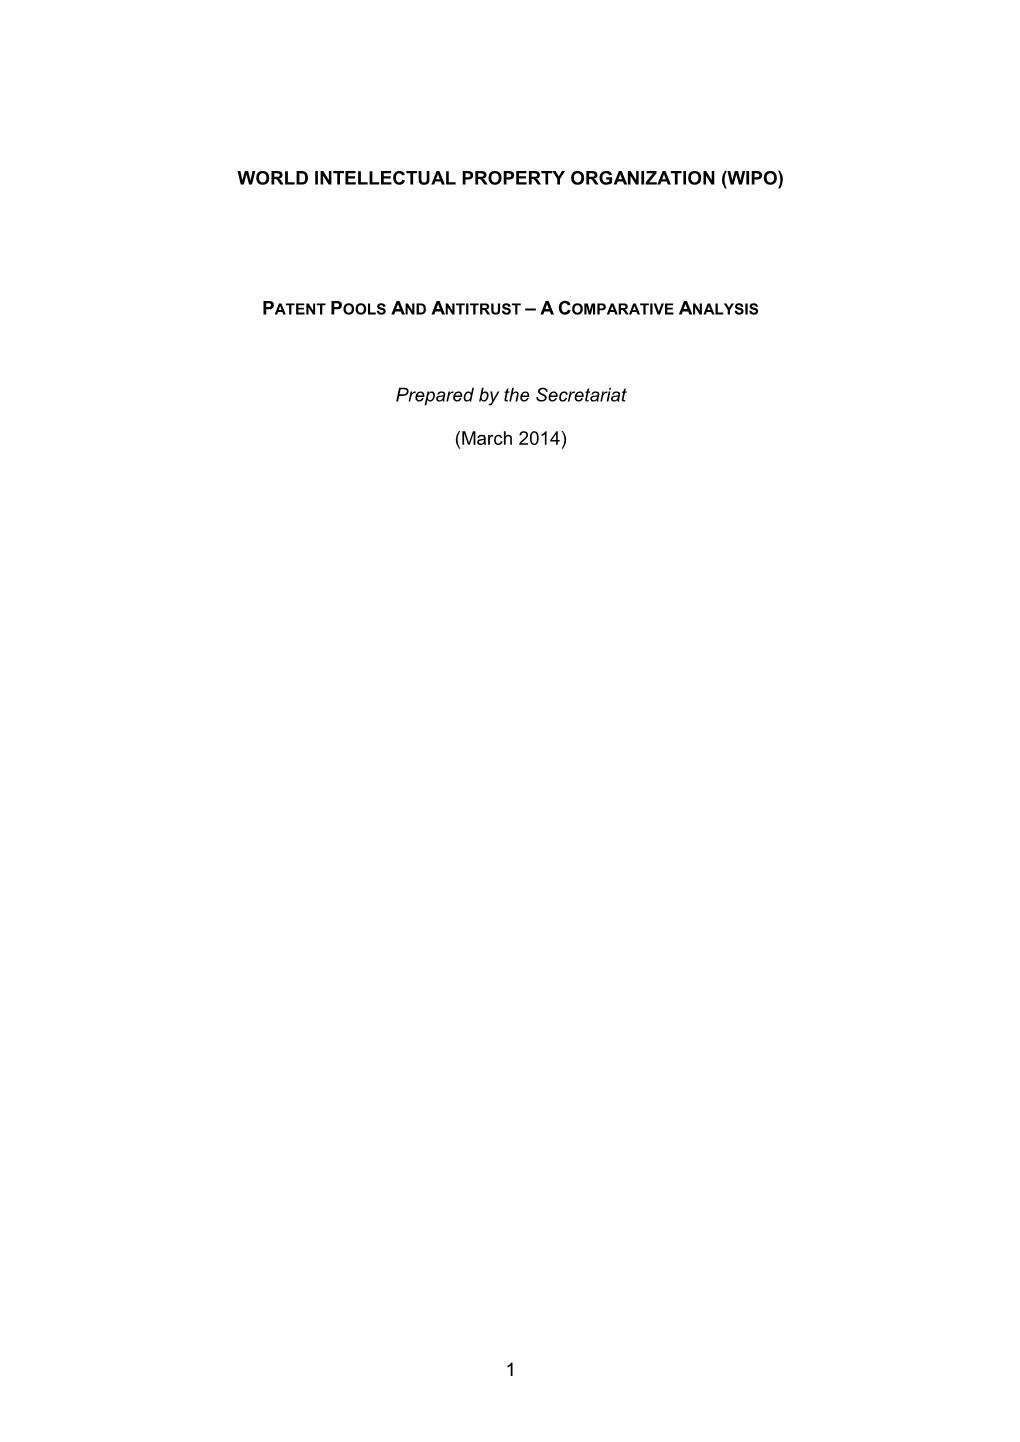 Patent Pools and Antitrust – a Comparative Analysis